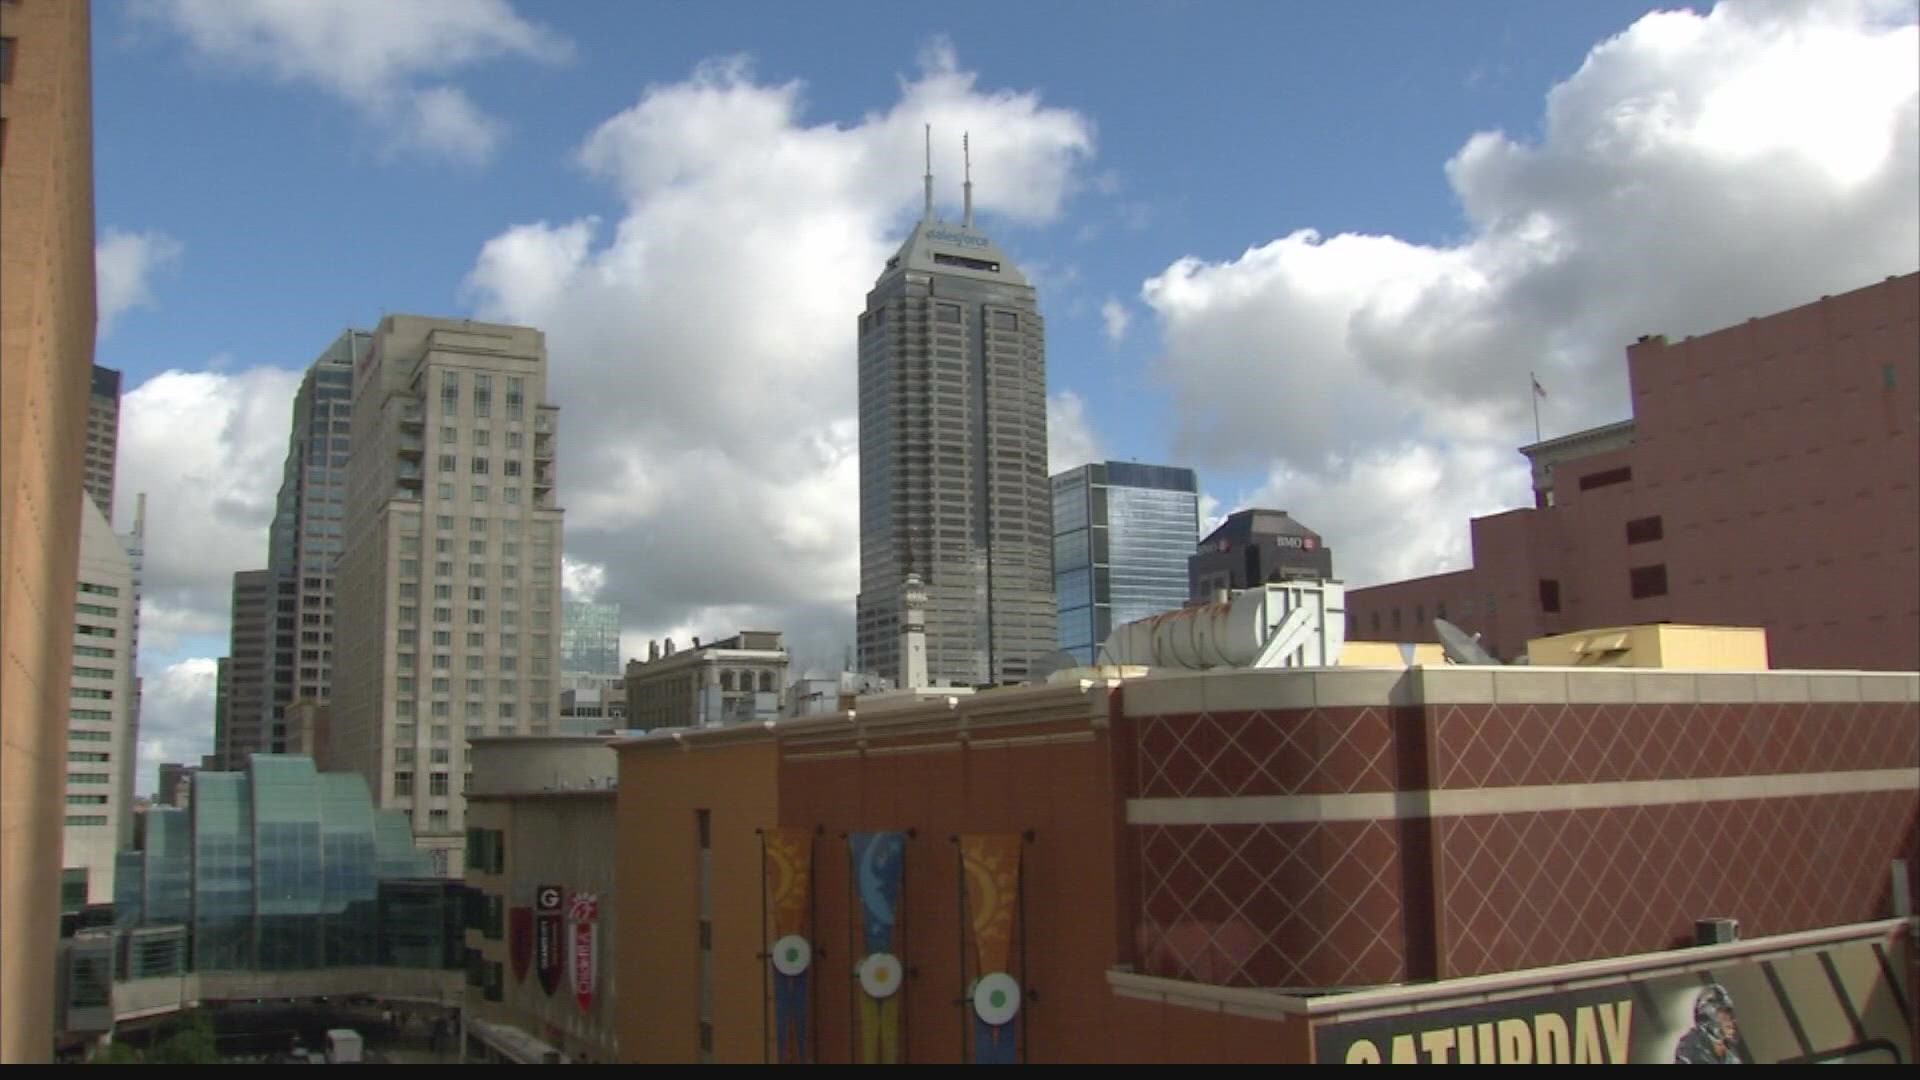 The future of downtown Indianapolis could mean fewer offices and more places to live.